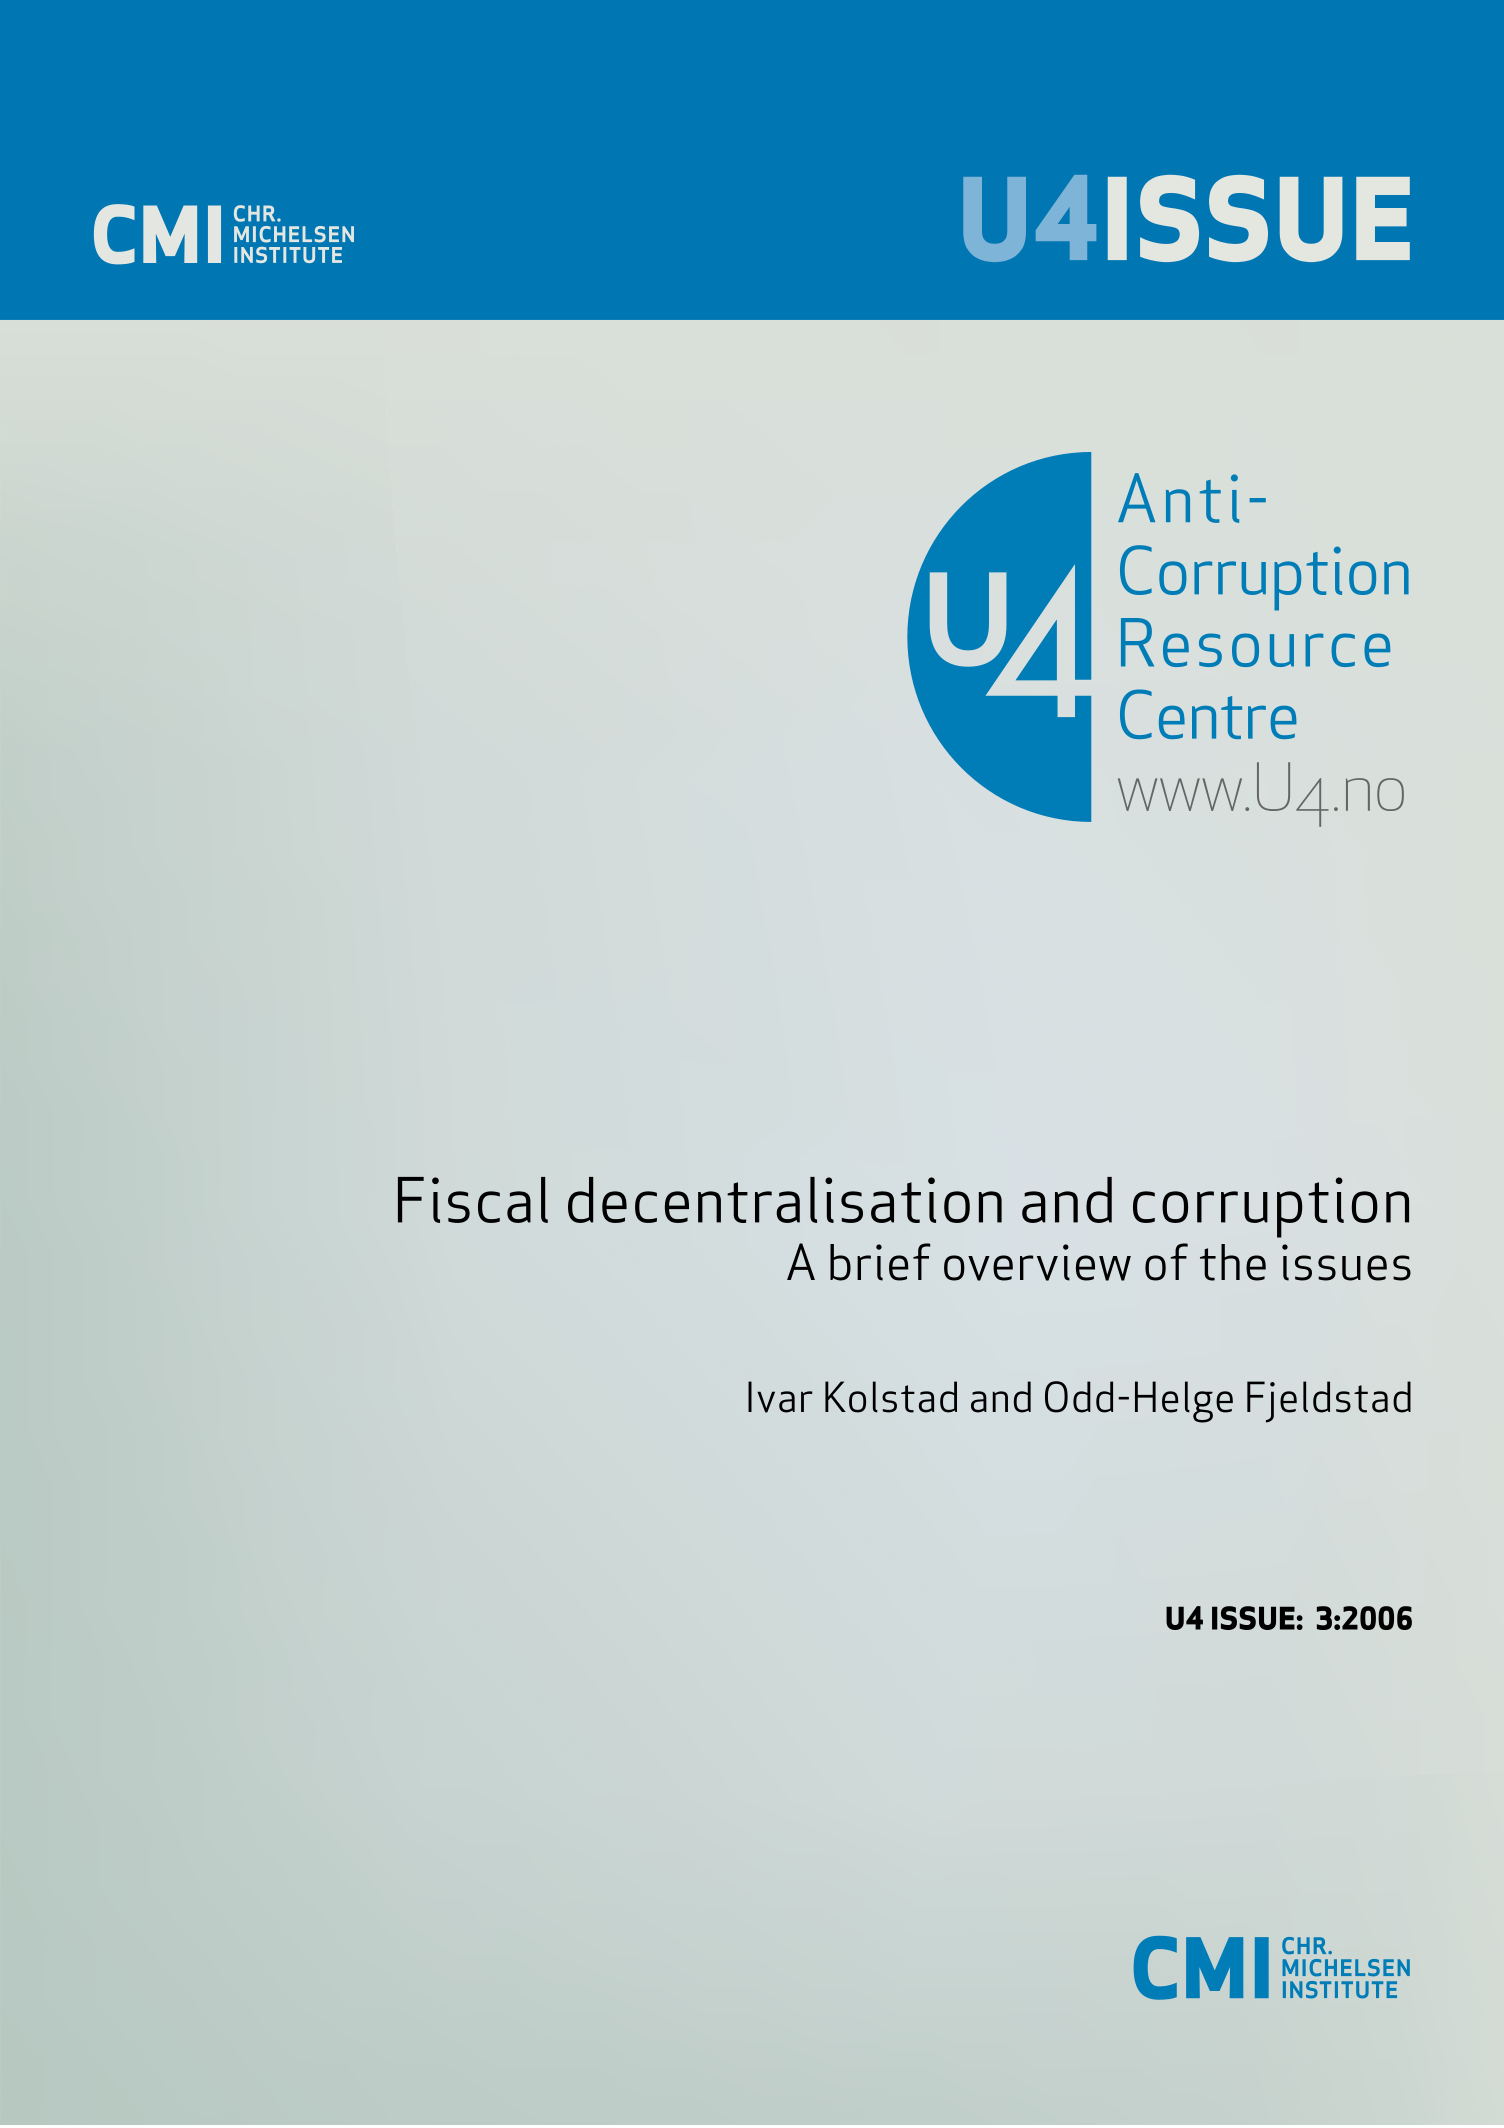 Fiscal decentralisation and corruption: A brief overview of the issues 